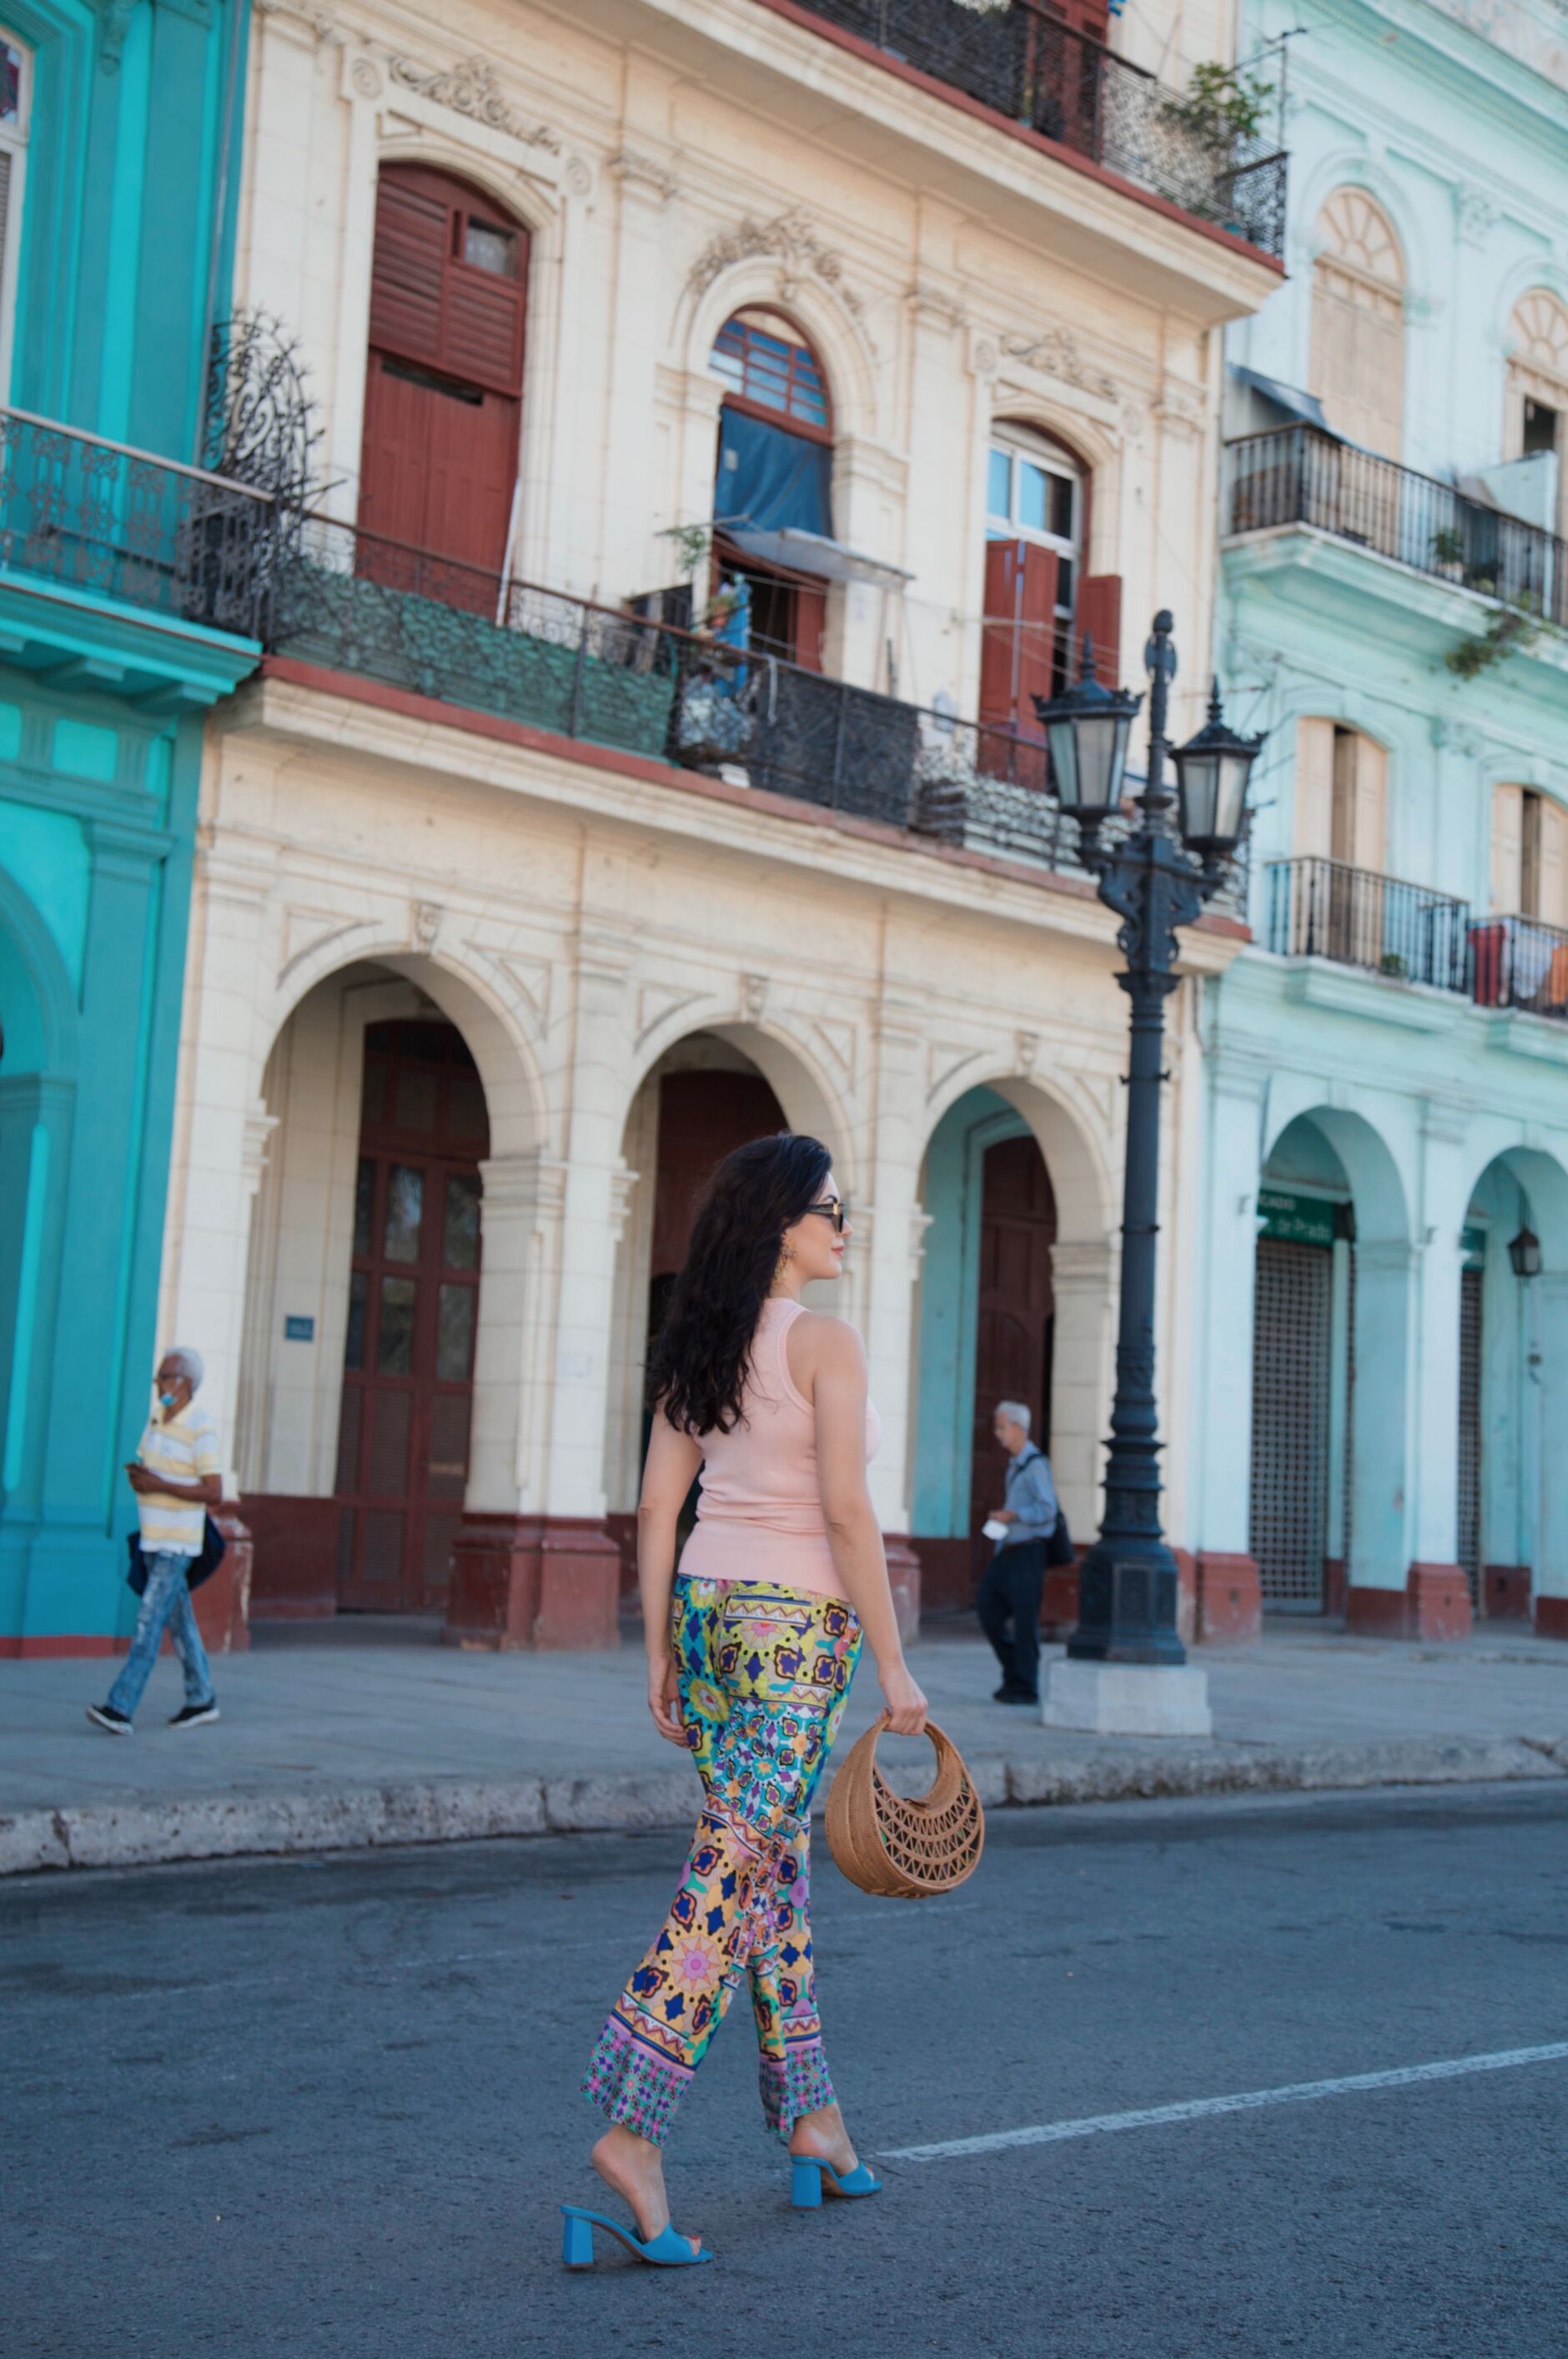 A TRAVEL GUIDE TO THE MOST BEAUTIFUL CITY IN THE CARIBBEAN: HAVANA, CUBA